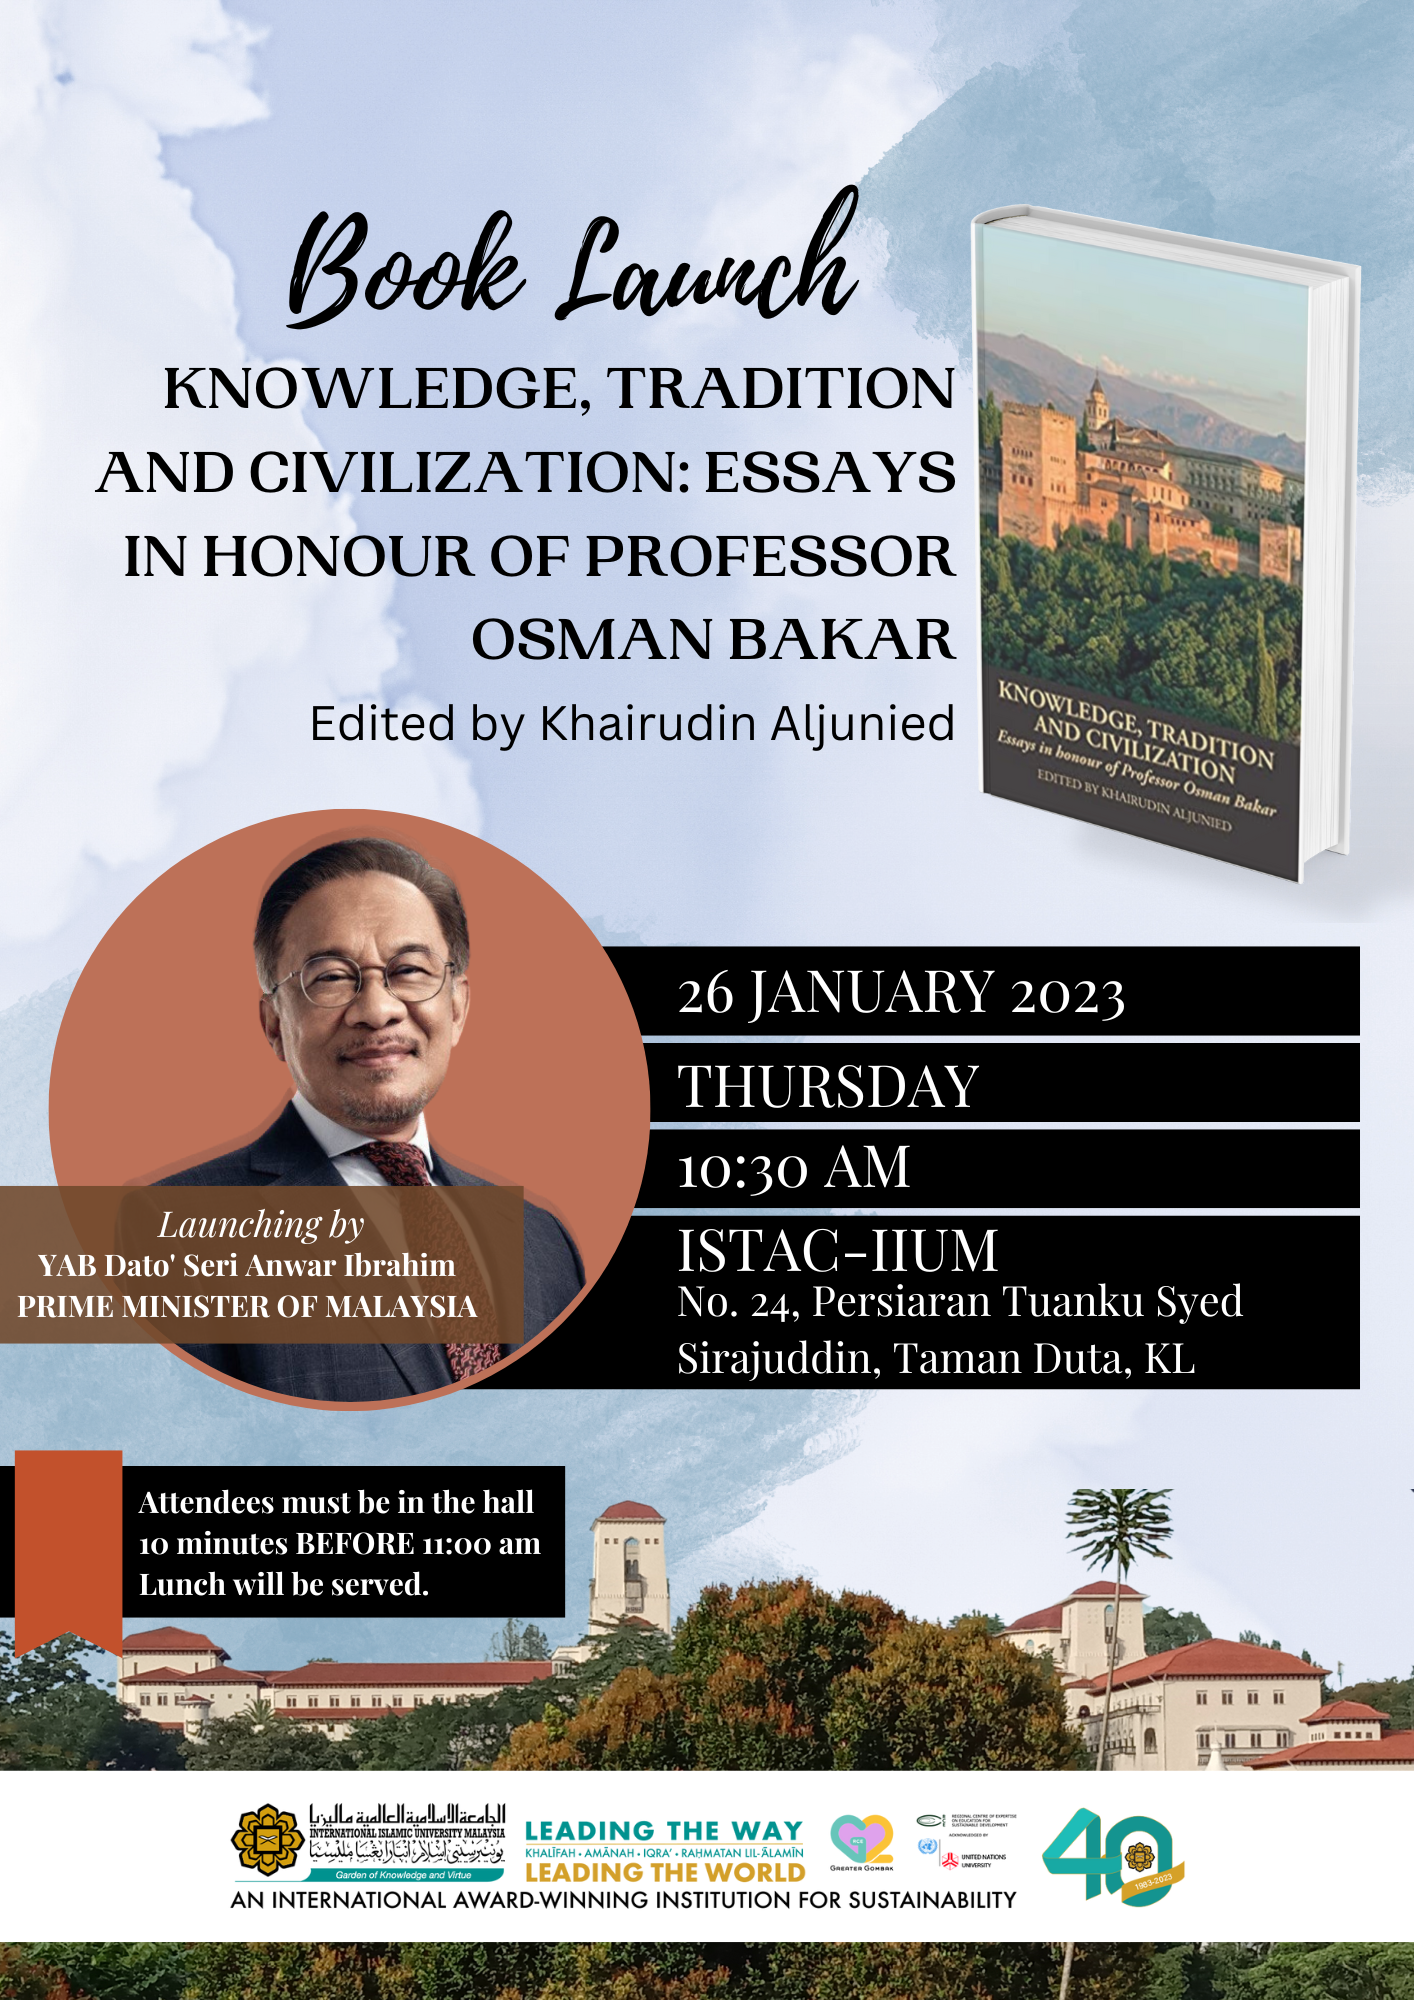 BOOK LAUNCH AND FORUM "KNOWLEDGE, TRADITION AND CIVILISATION: ESSAYS IN HONOUR OF PROFESSOR OSMAN BAKAR"